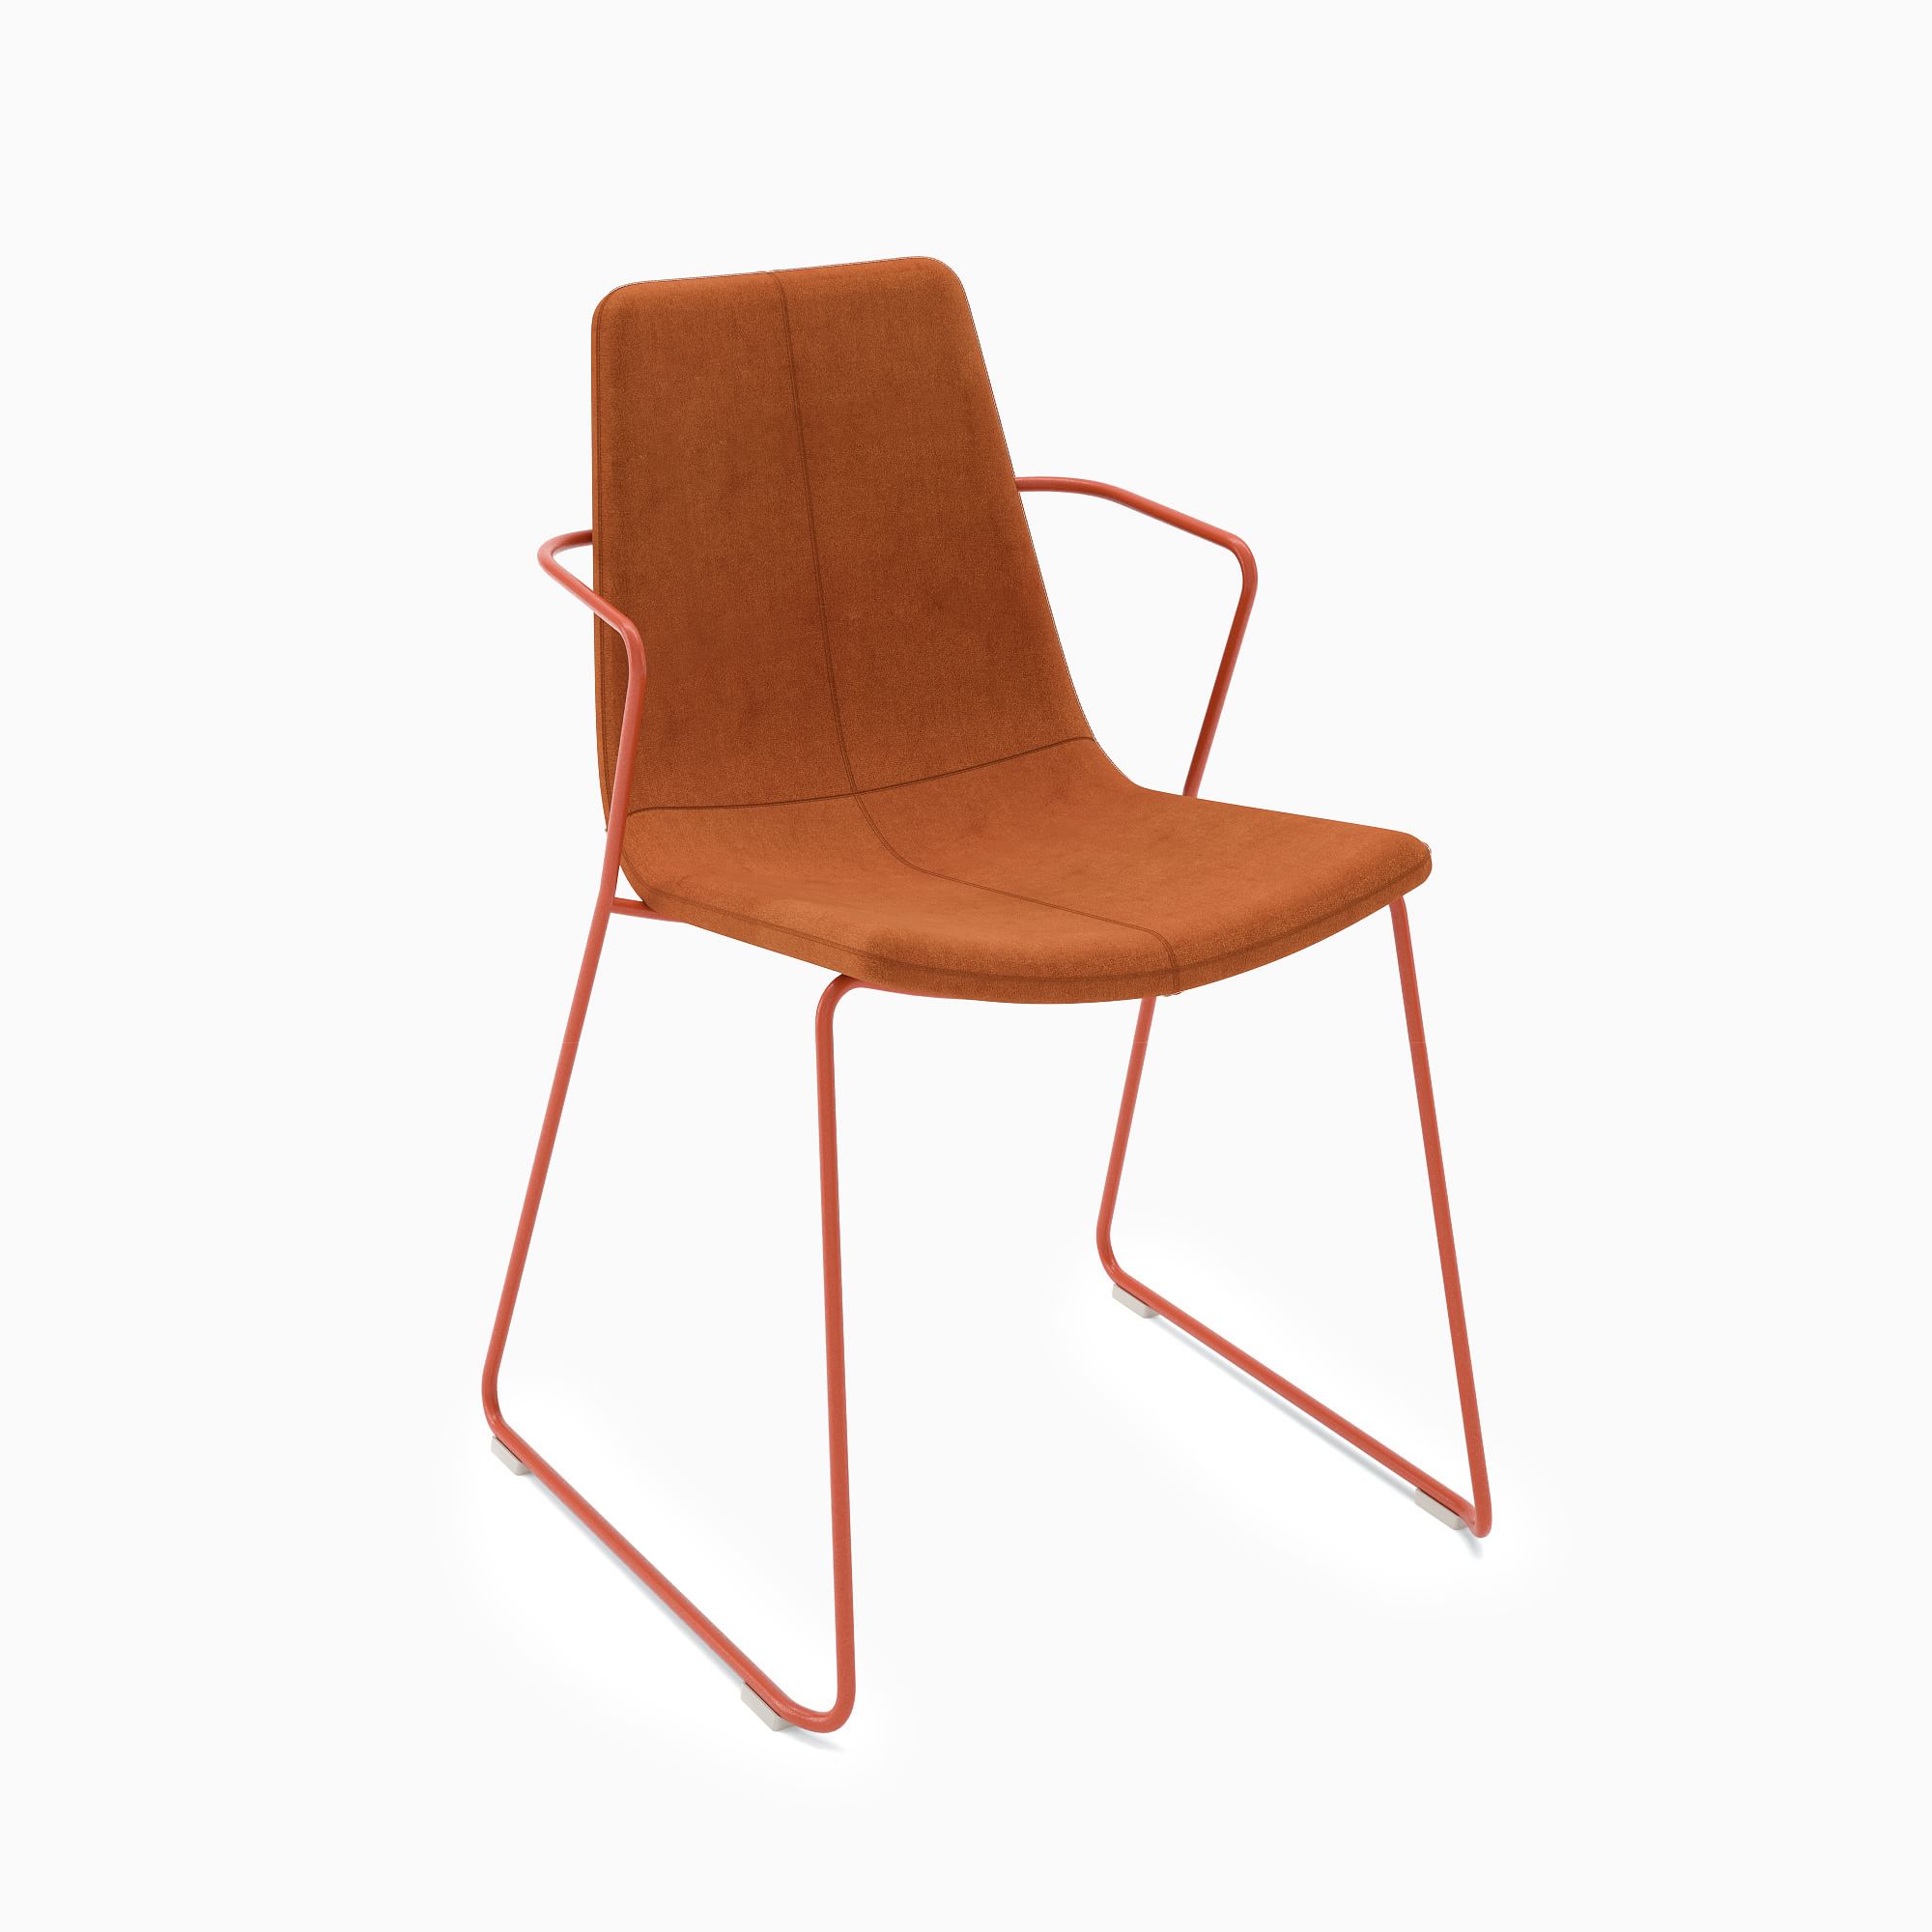 Slope Stacking Chair | West Elm